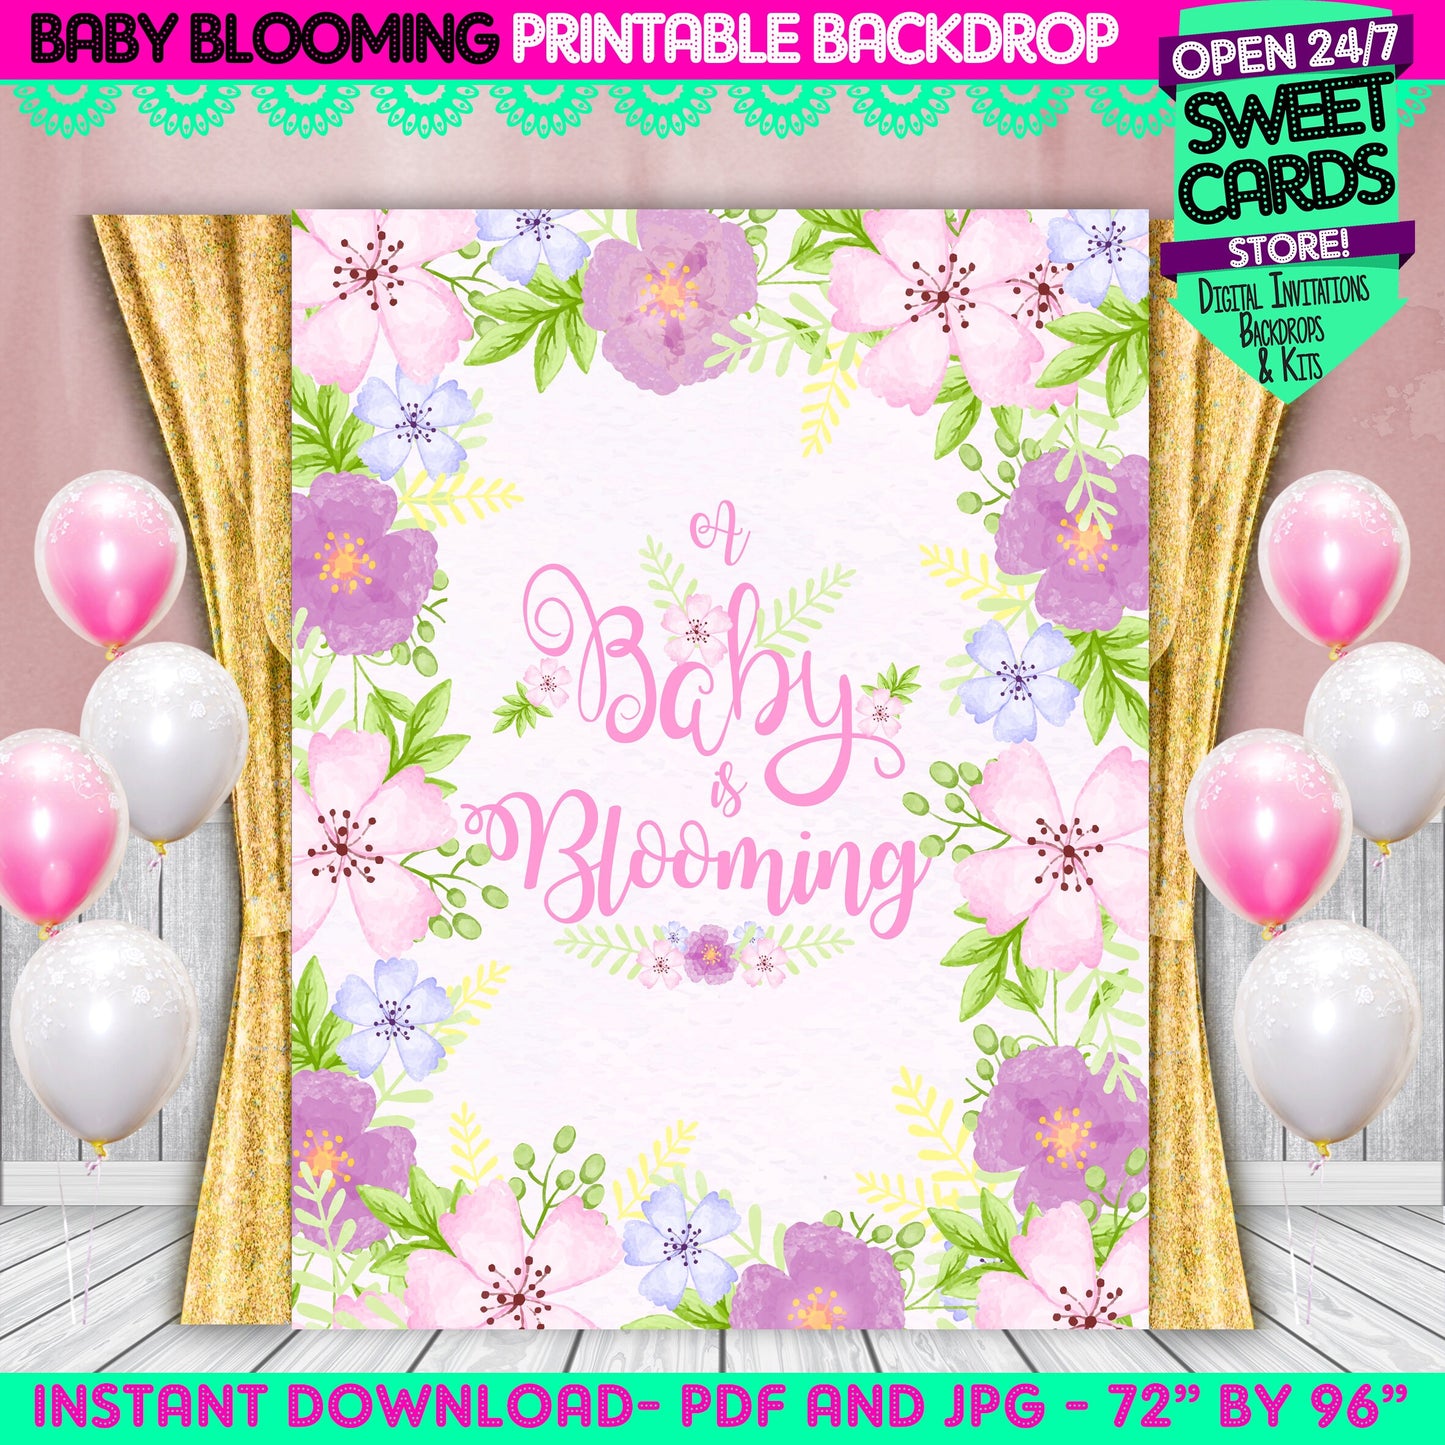 Baby Blooming Flowers Printable Backdrop, Baby Shower Flowers backdrop, Sprin baby shower backdrop, Floral baby shower,